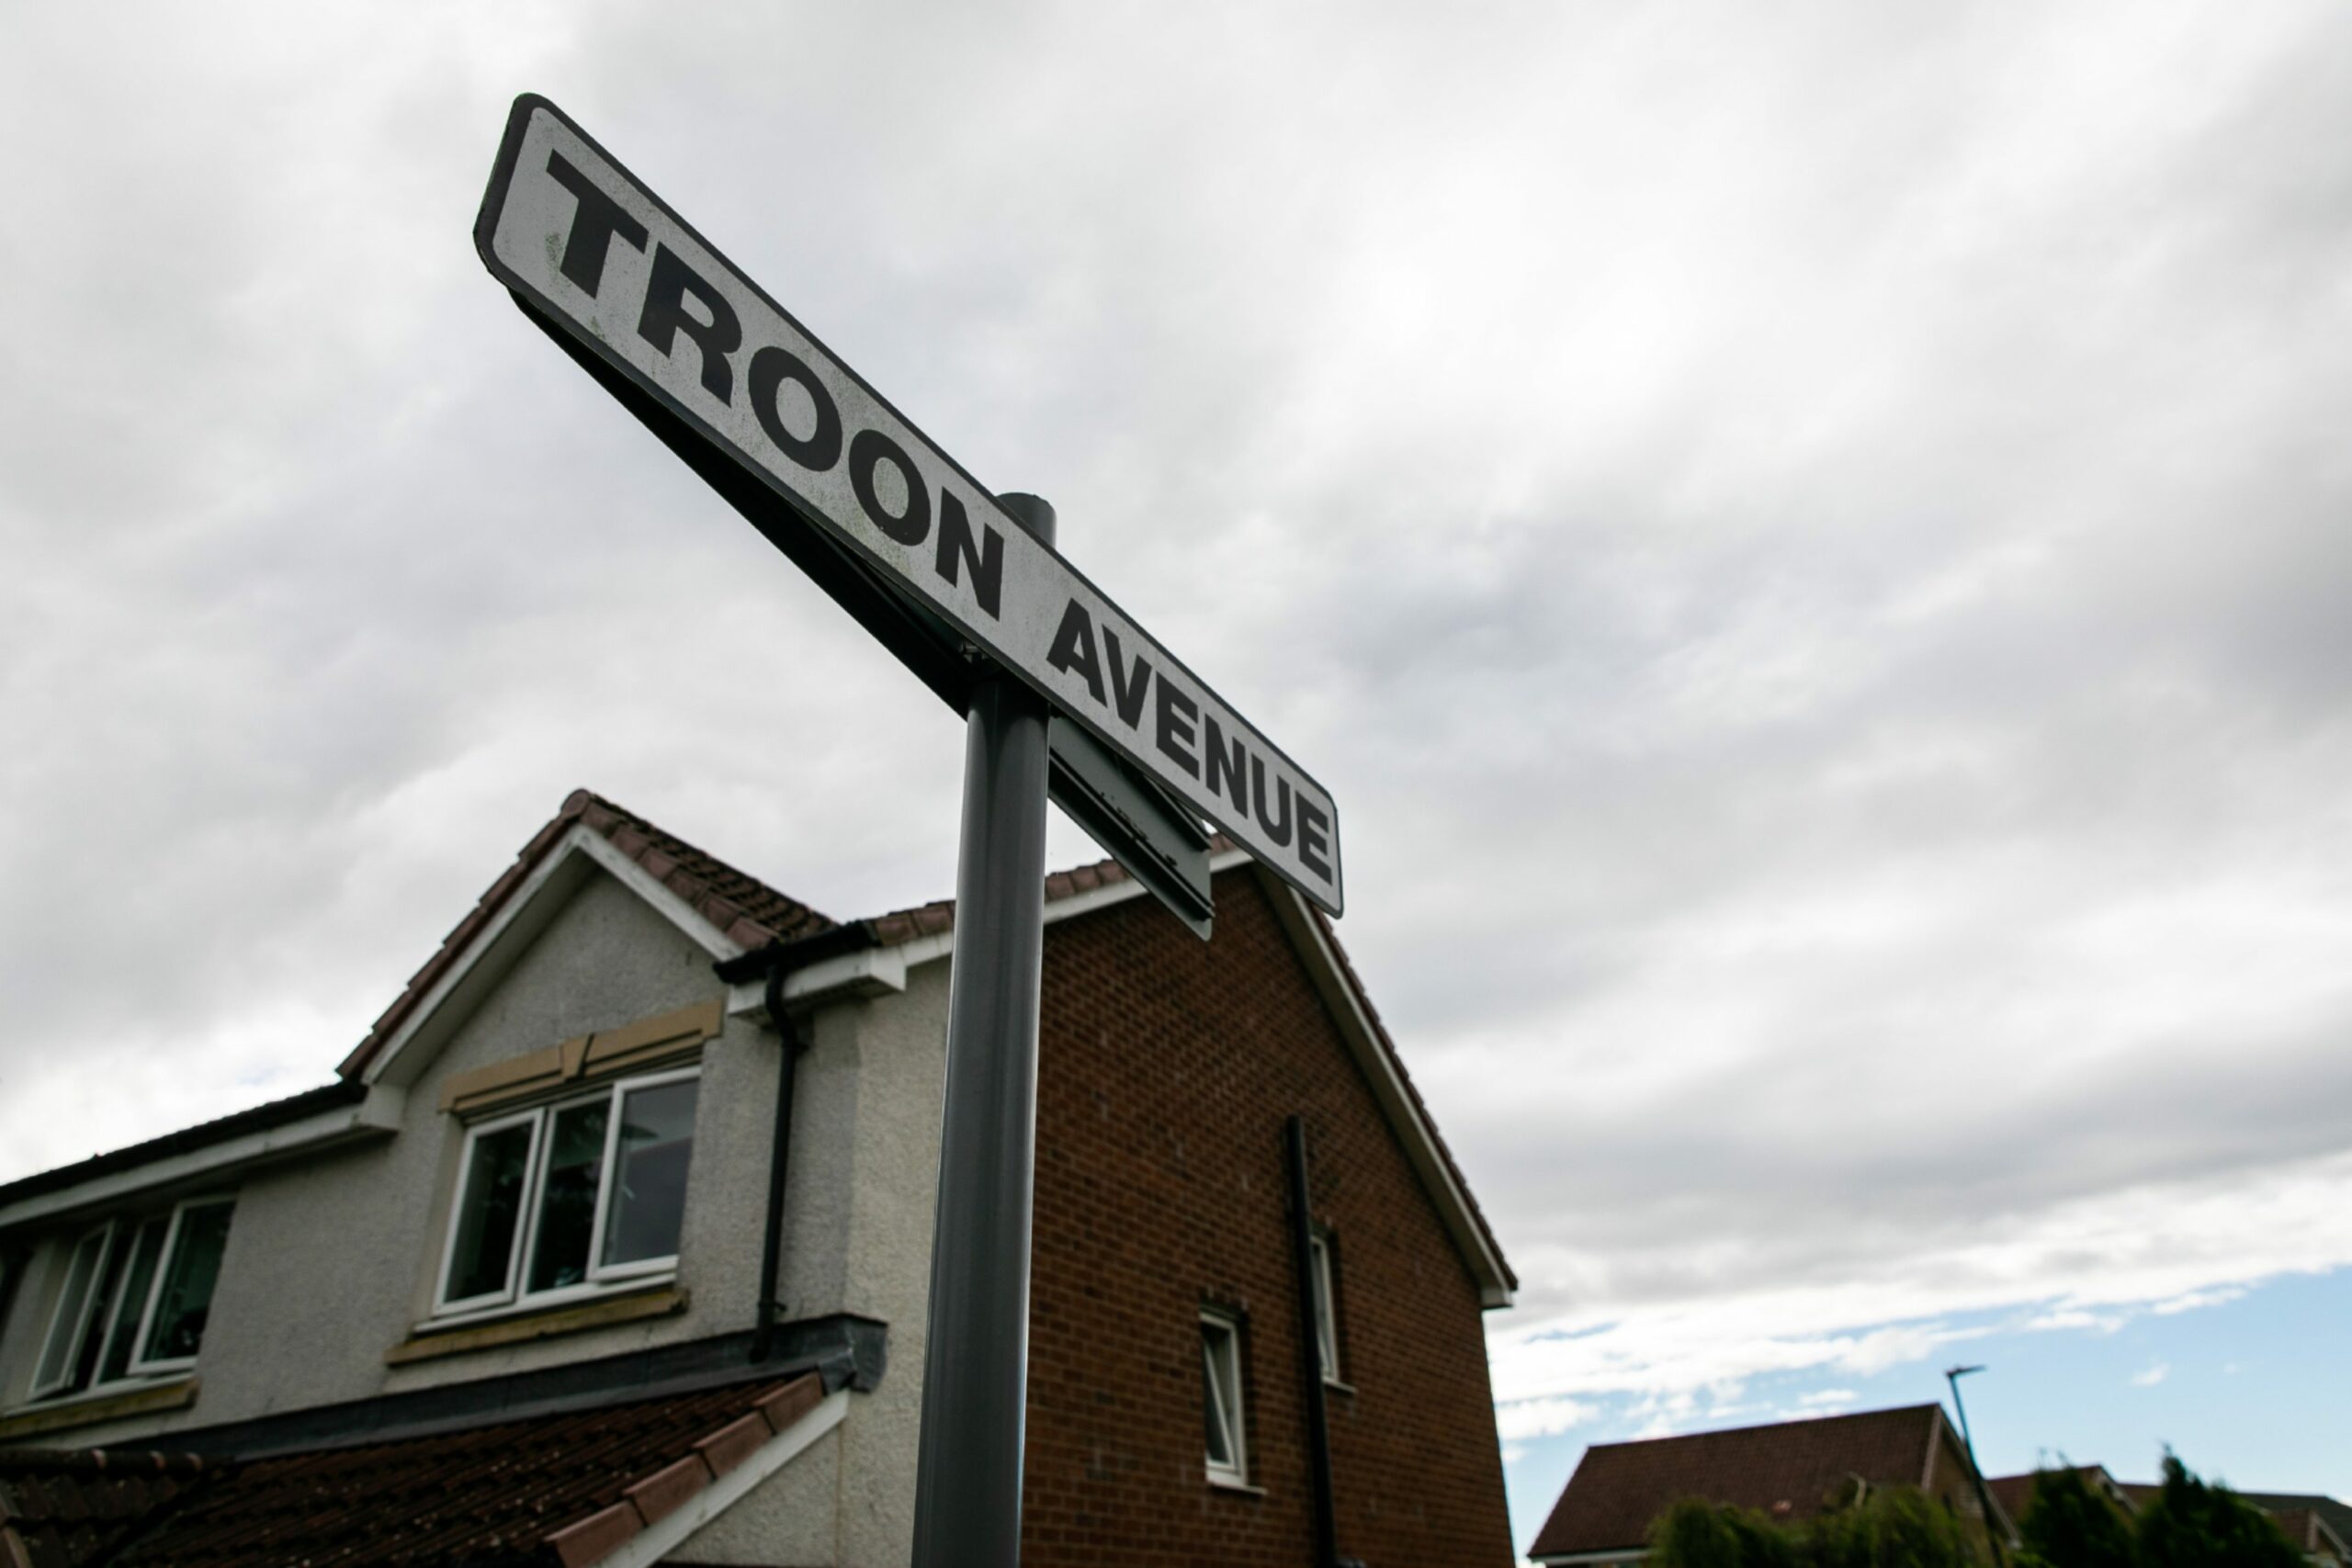 a sign for Troon Avenue, Dundee